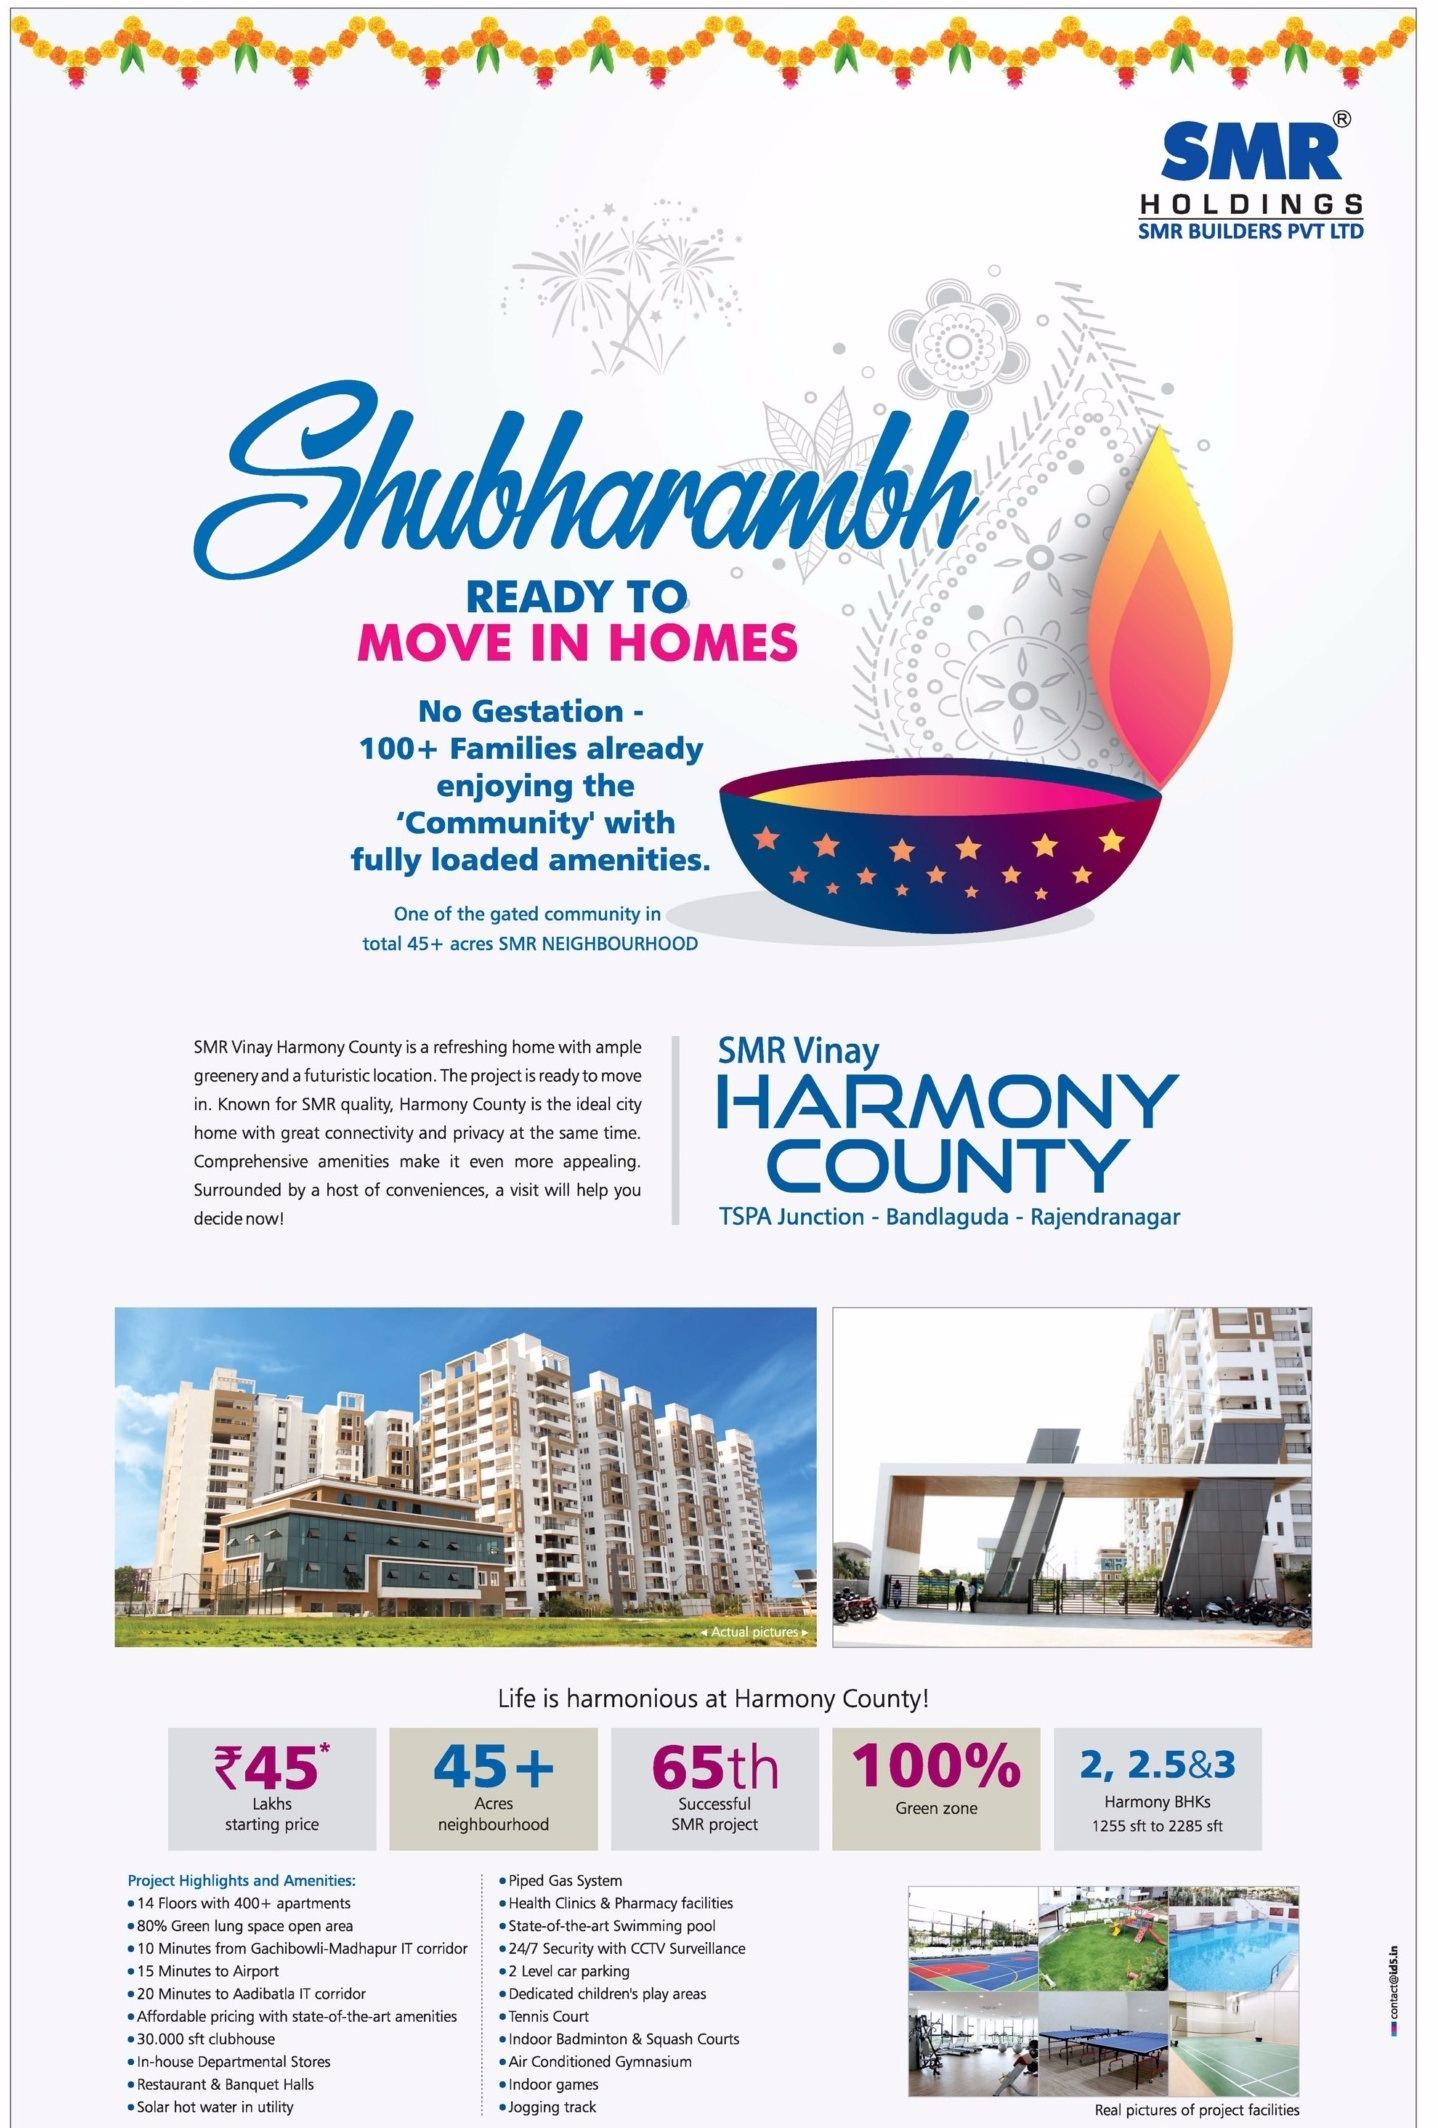 SMR Holdings presents ready to move in homes at SMR Vinay Harmony County in Hyderabad Update